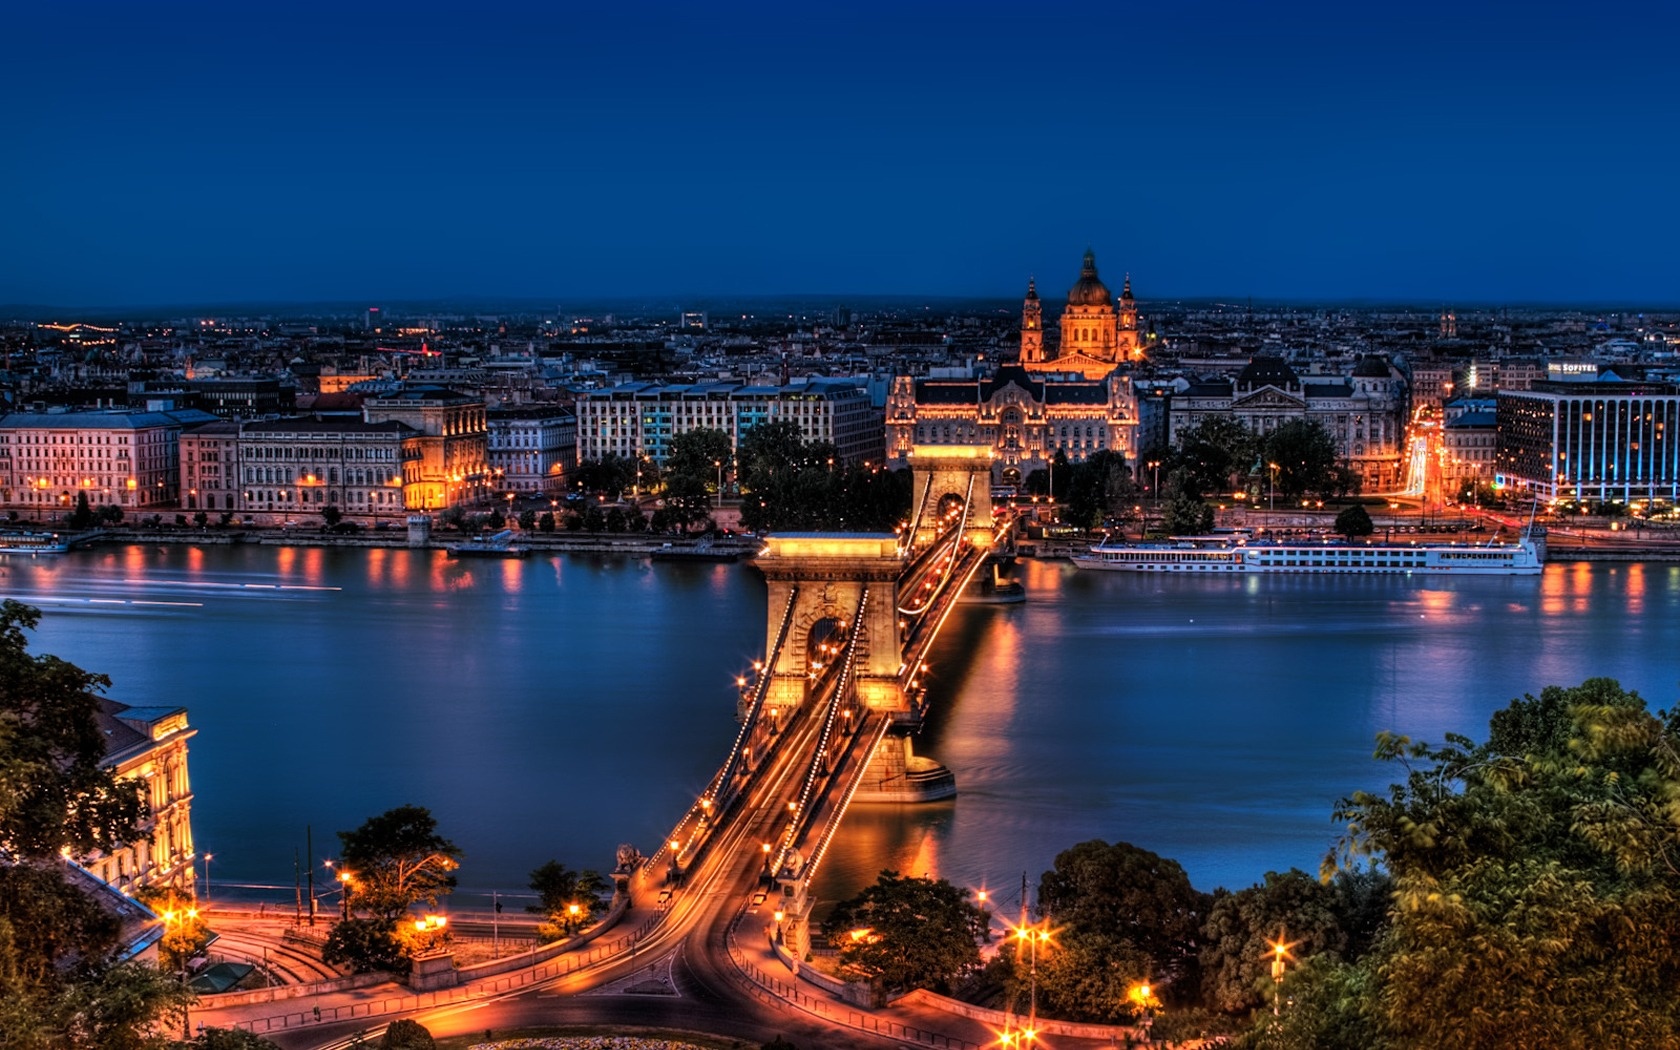 places to visit in budapest at night